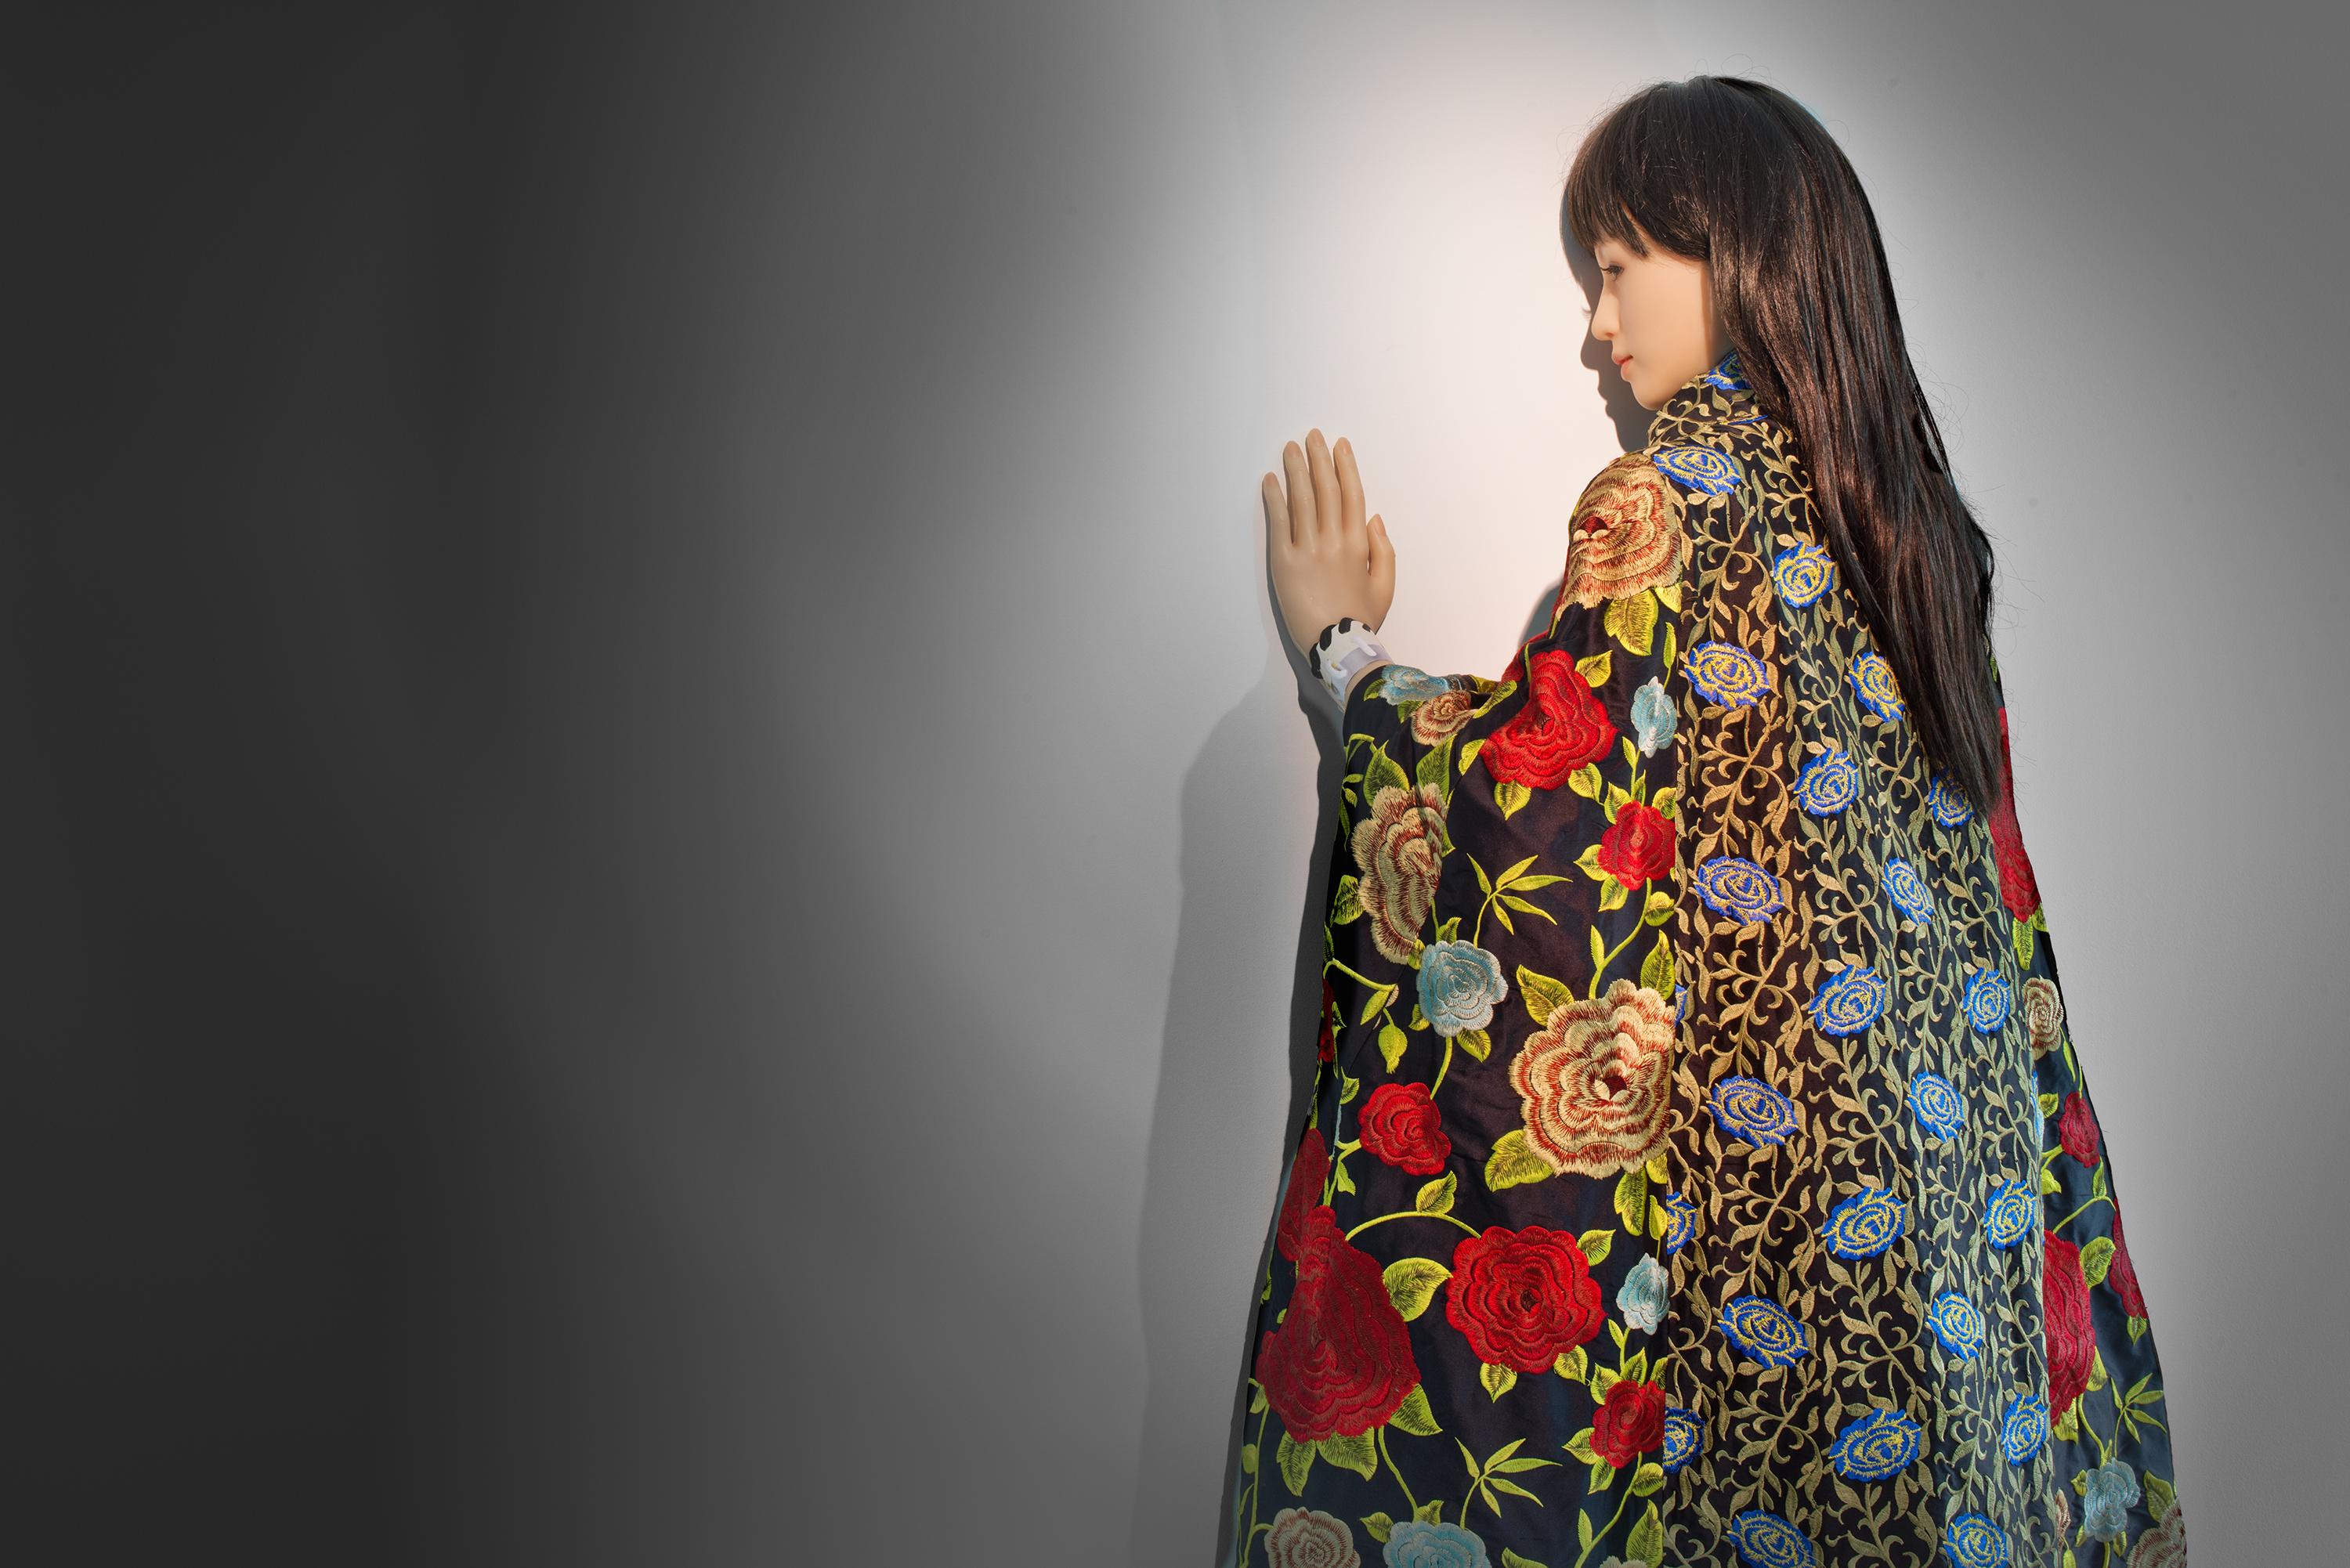 A female doll with long dark hair wearing a floral kimono stands with her back to the viewer, her palm pressed against a white wall.